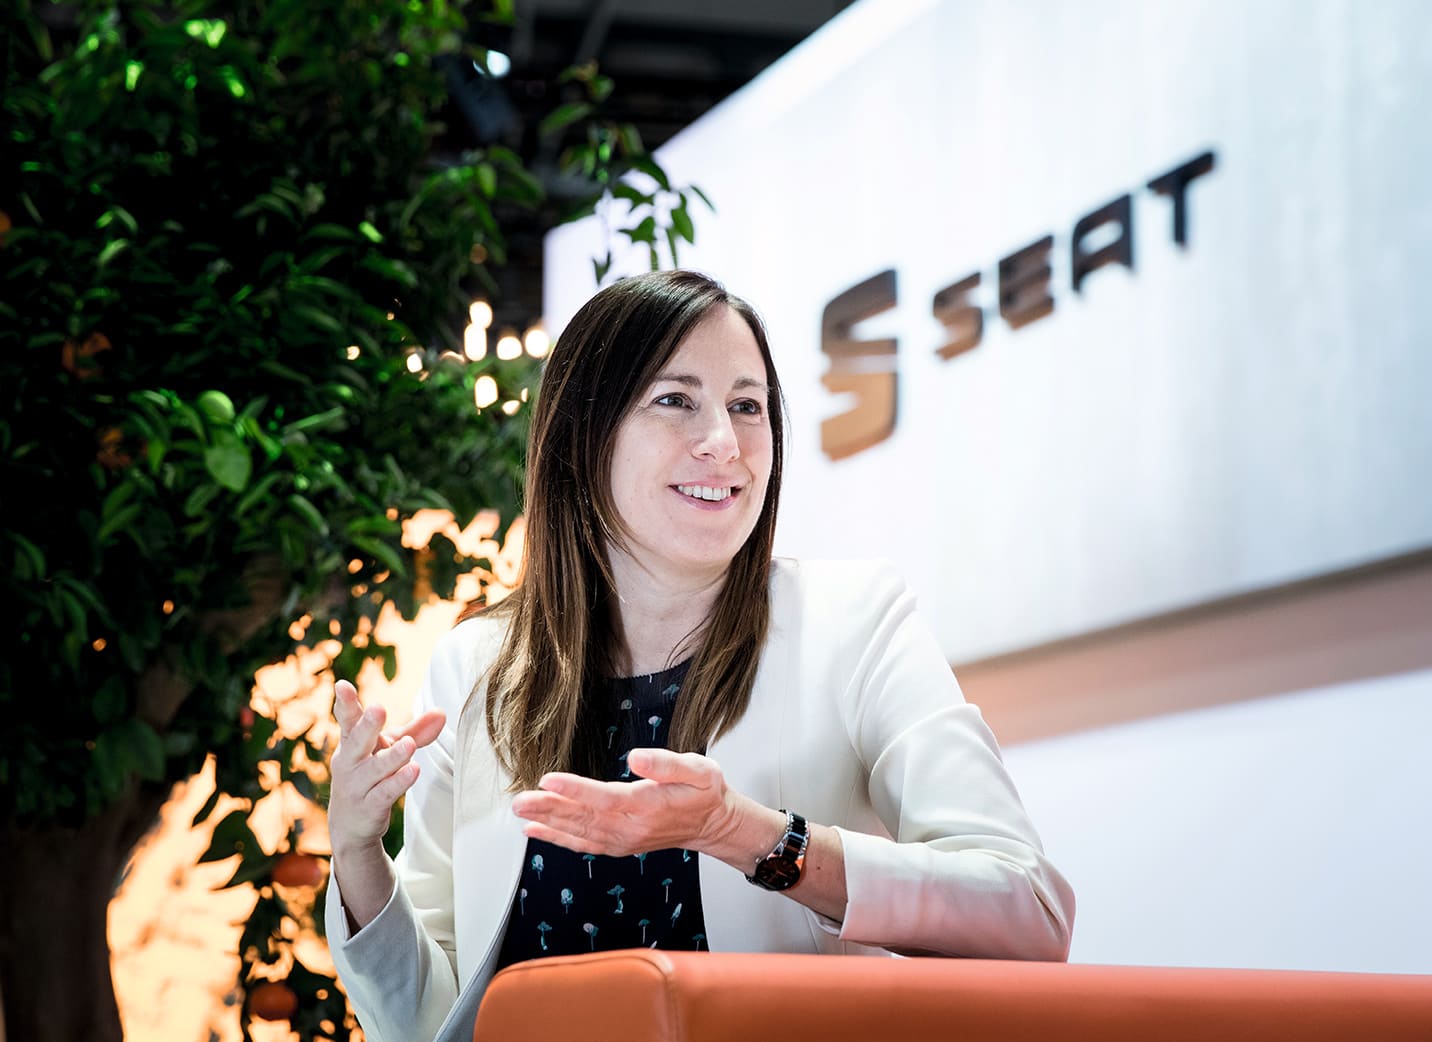 SEAT Manager of Infotainment and Connected Car Leyre Olavarria bei einer Rede | SEAT